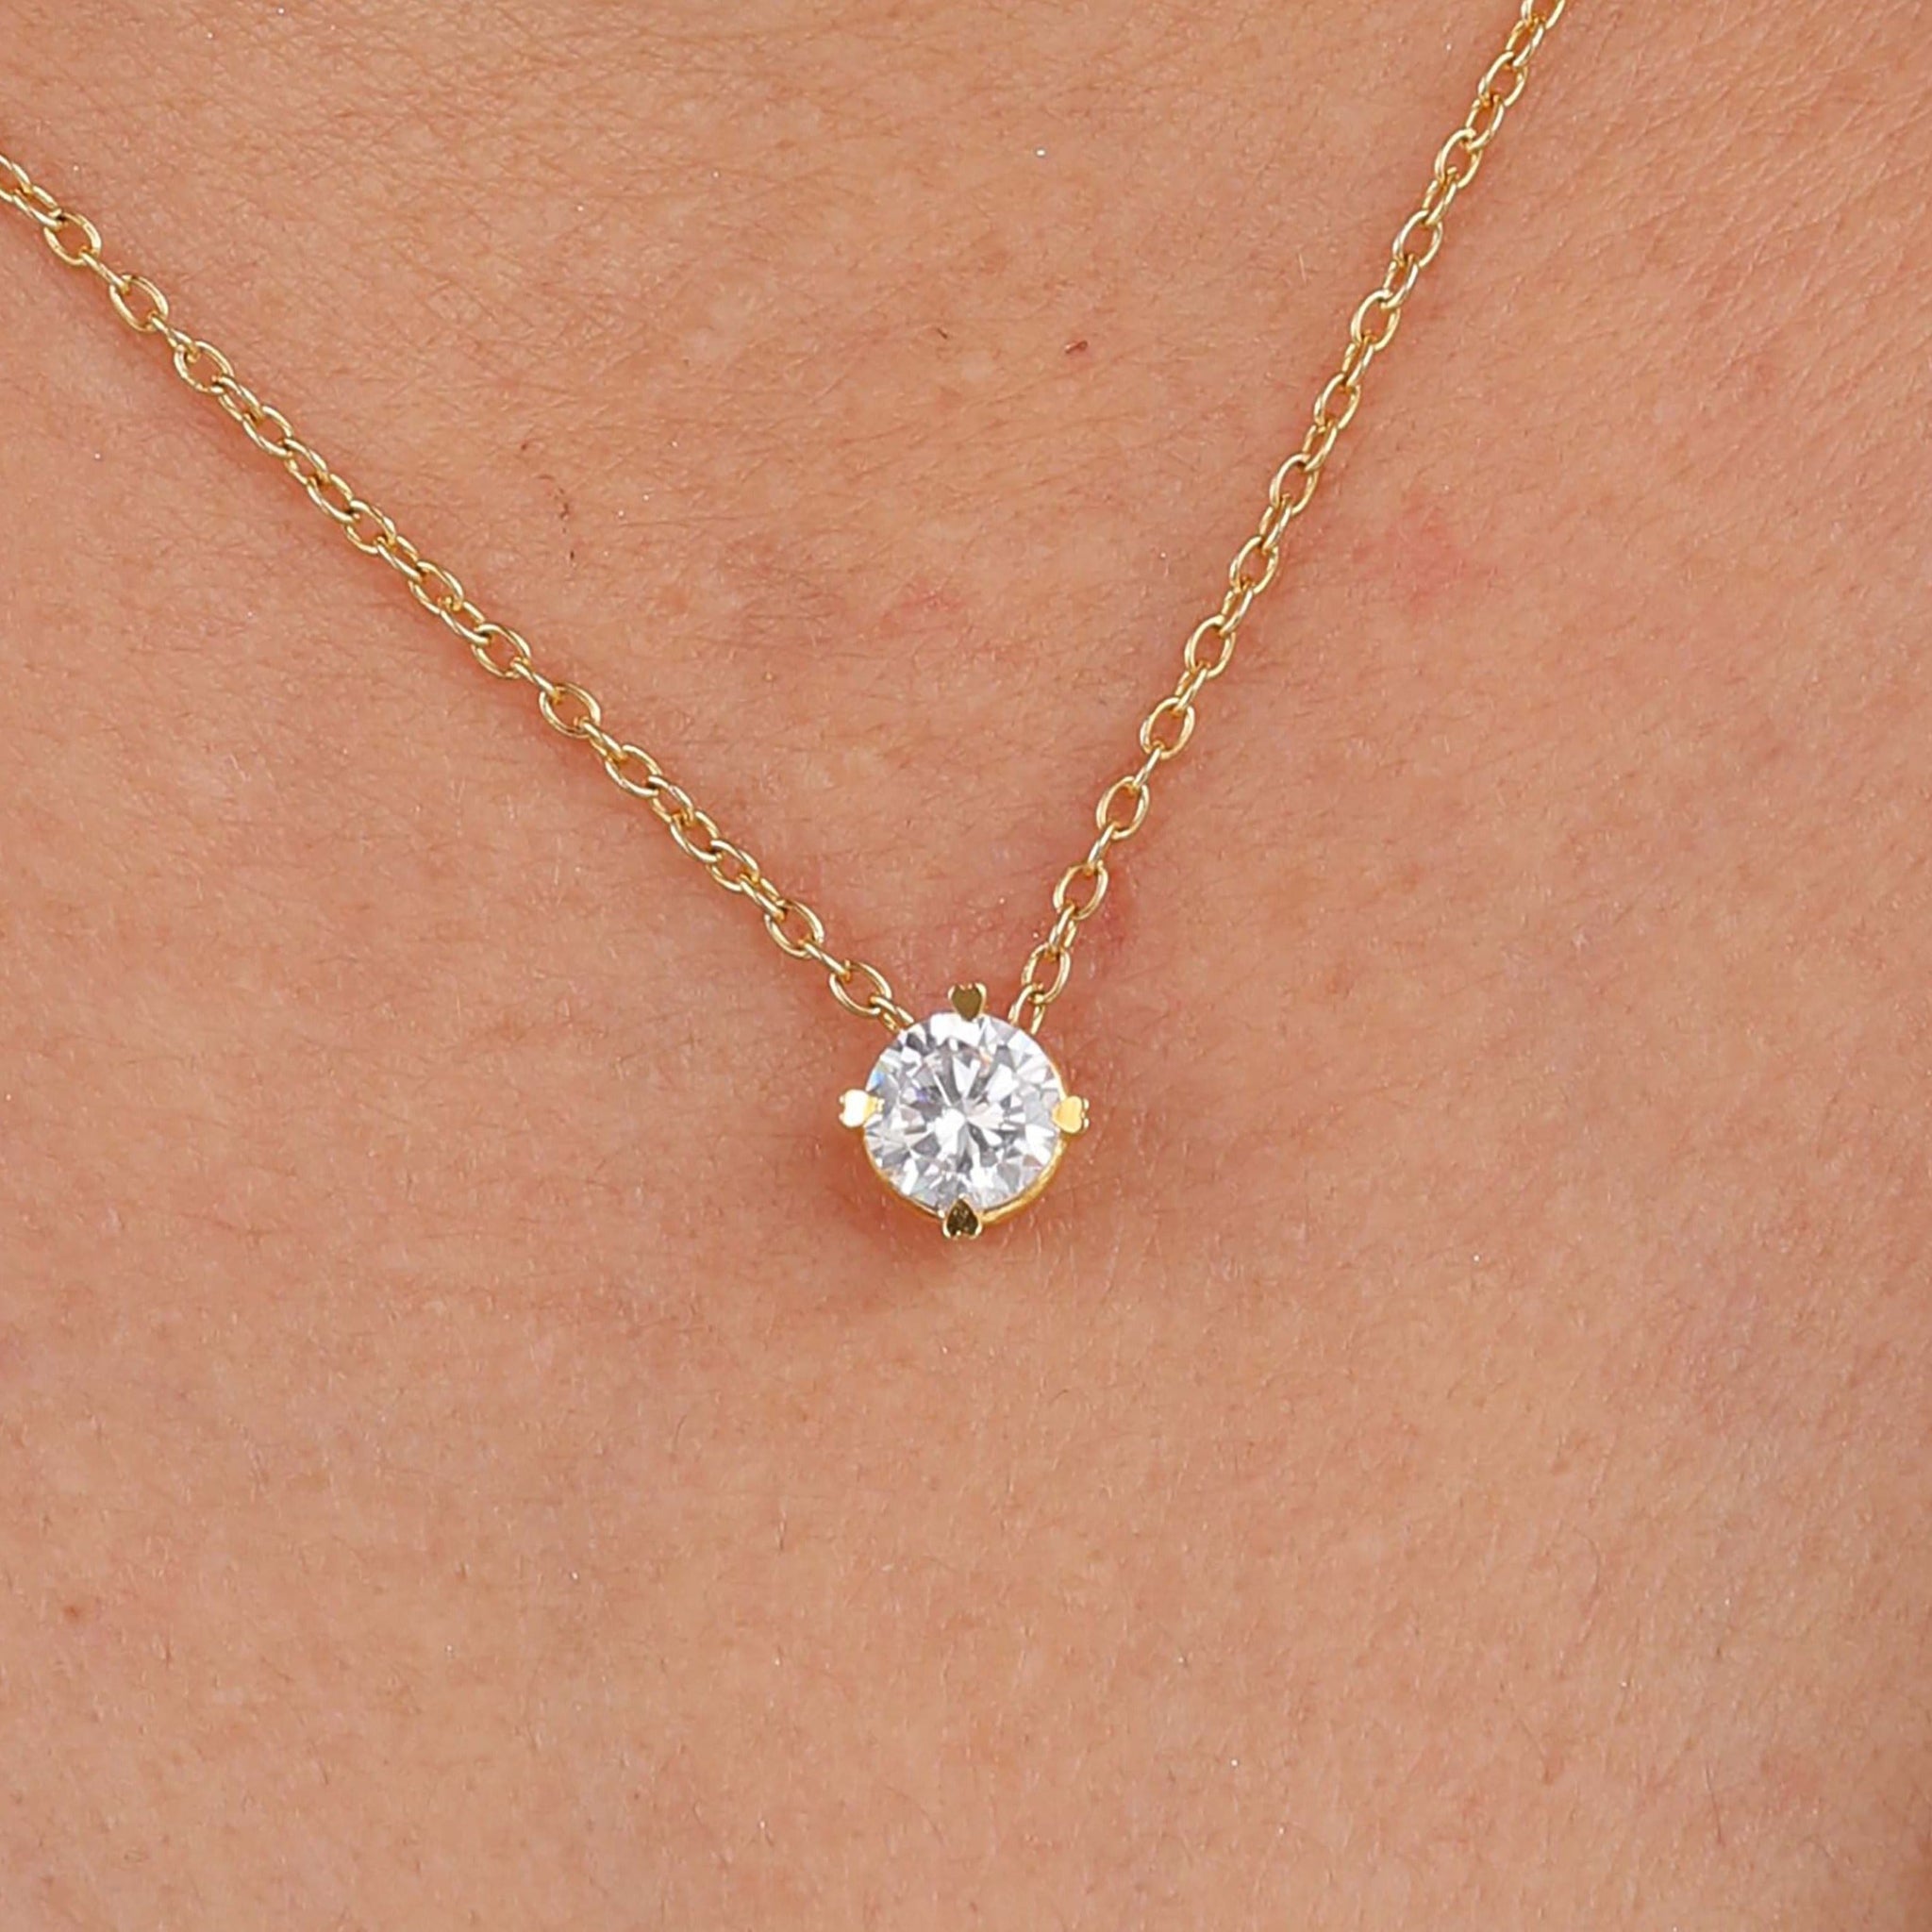 4 prong solitaire necklace